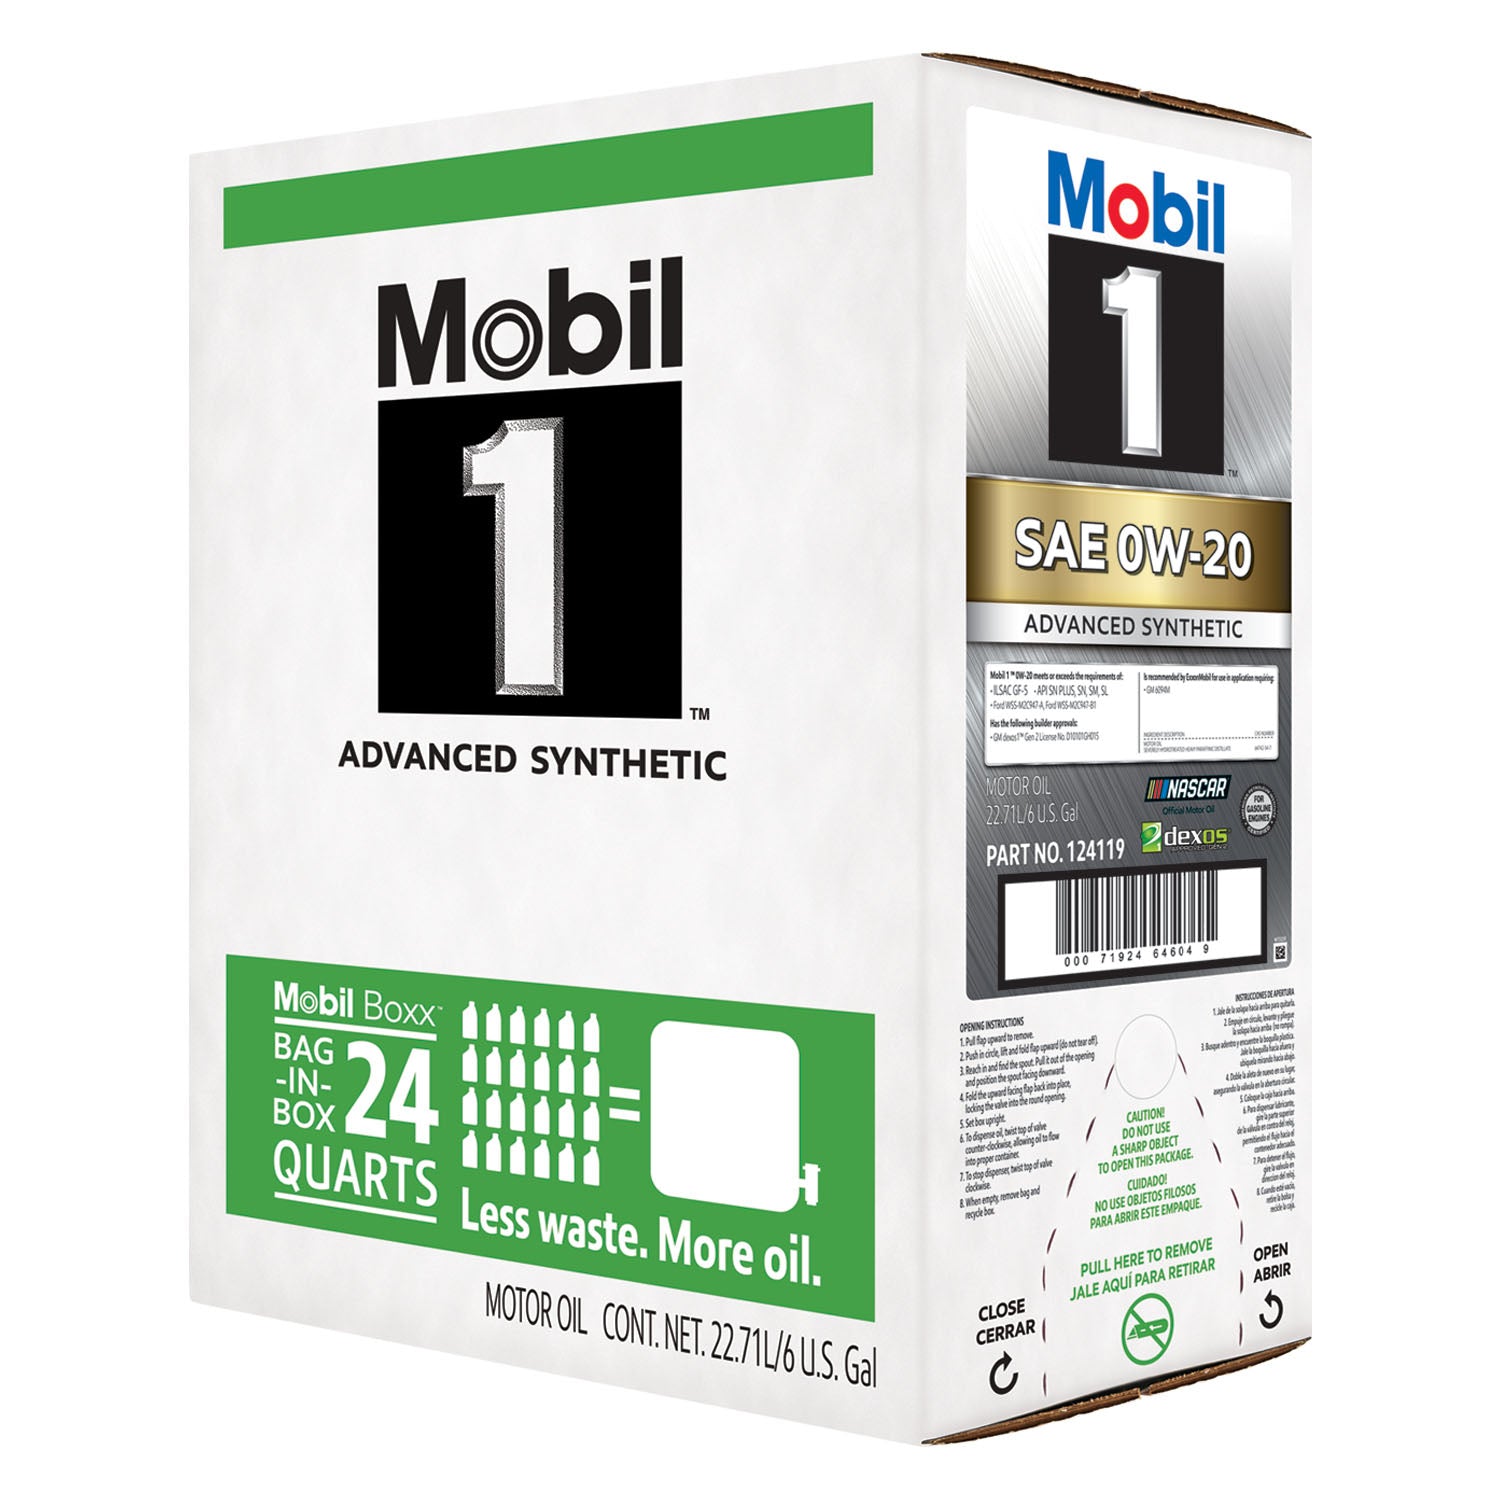 XMO 124119 Mobil 1 Advanced Fuel Economy Full Synthetic 0w-20 (6 Gal Box)